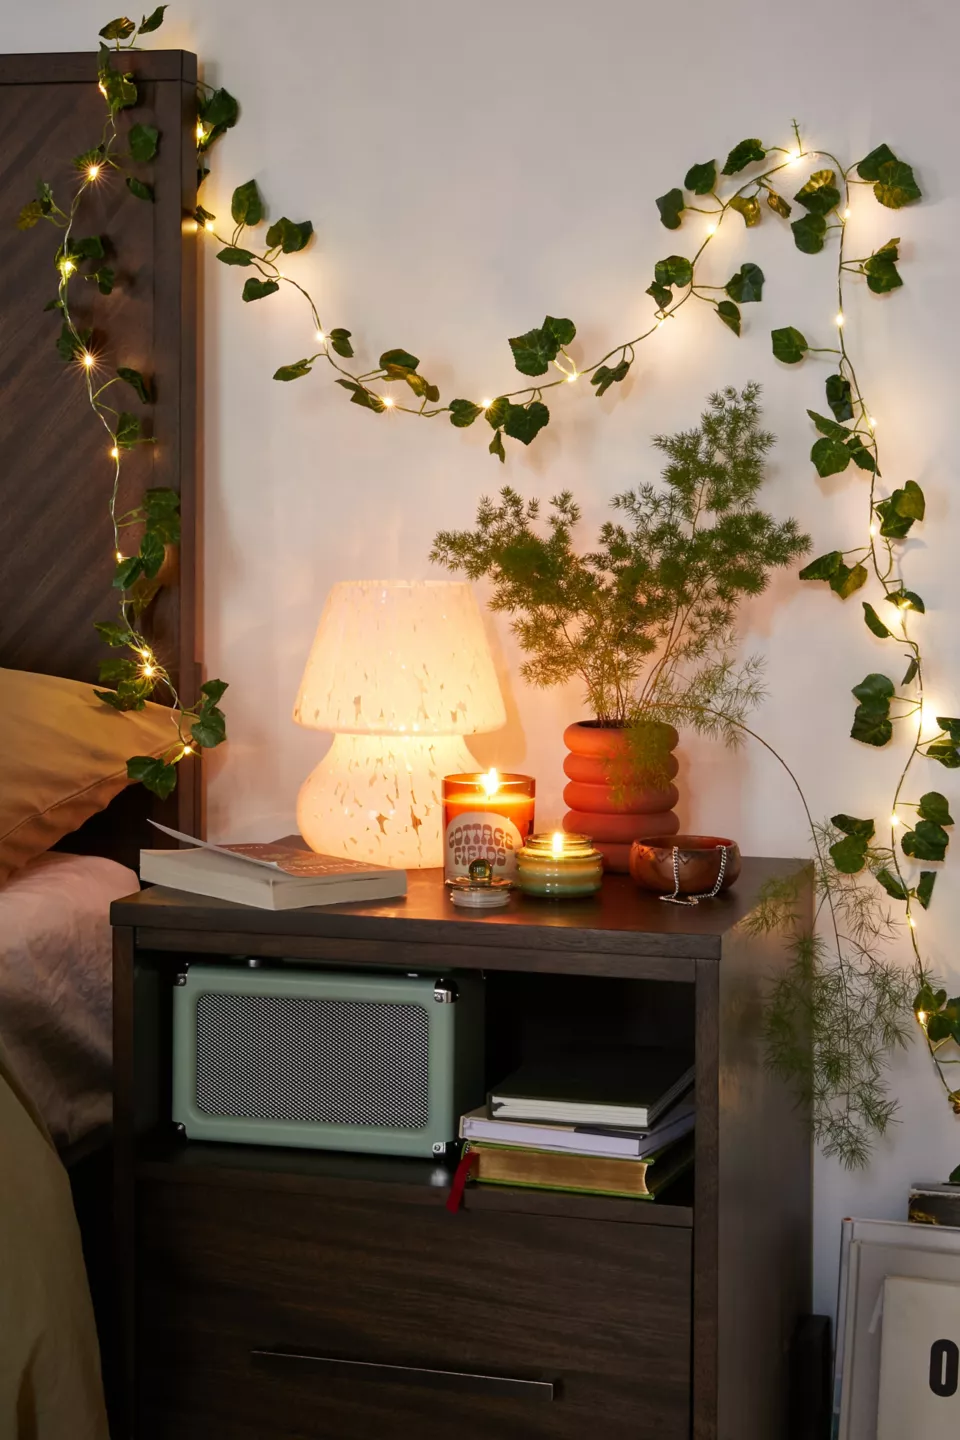 One vine of green leaves fairy lights is hung on the wall above a bed